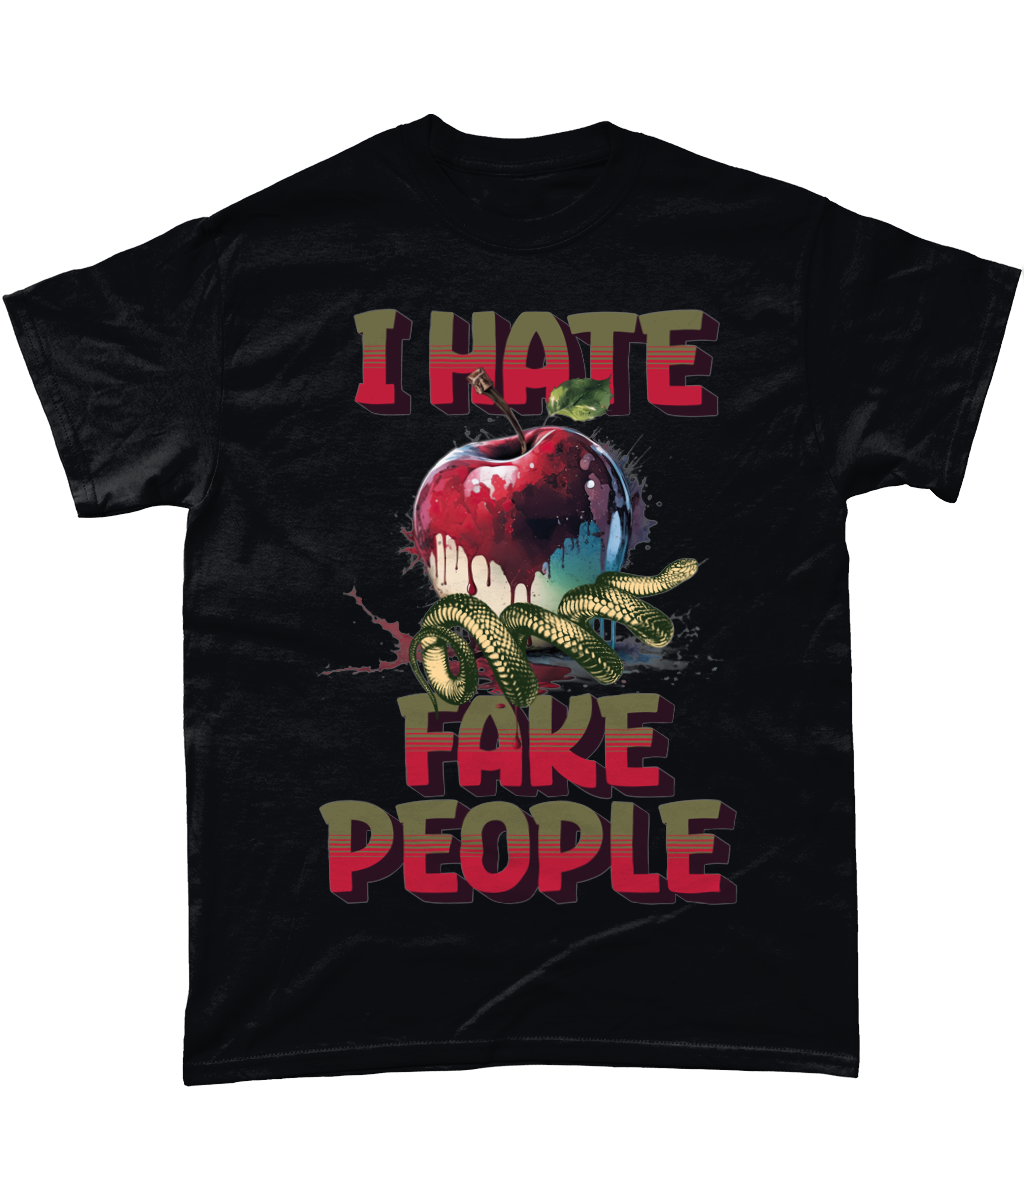 I hate people graphic tee funny Cotton T-Shirt